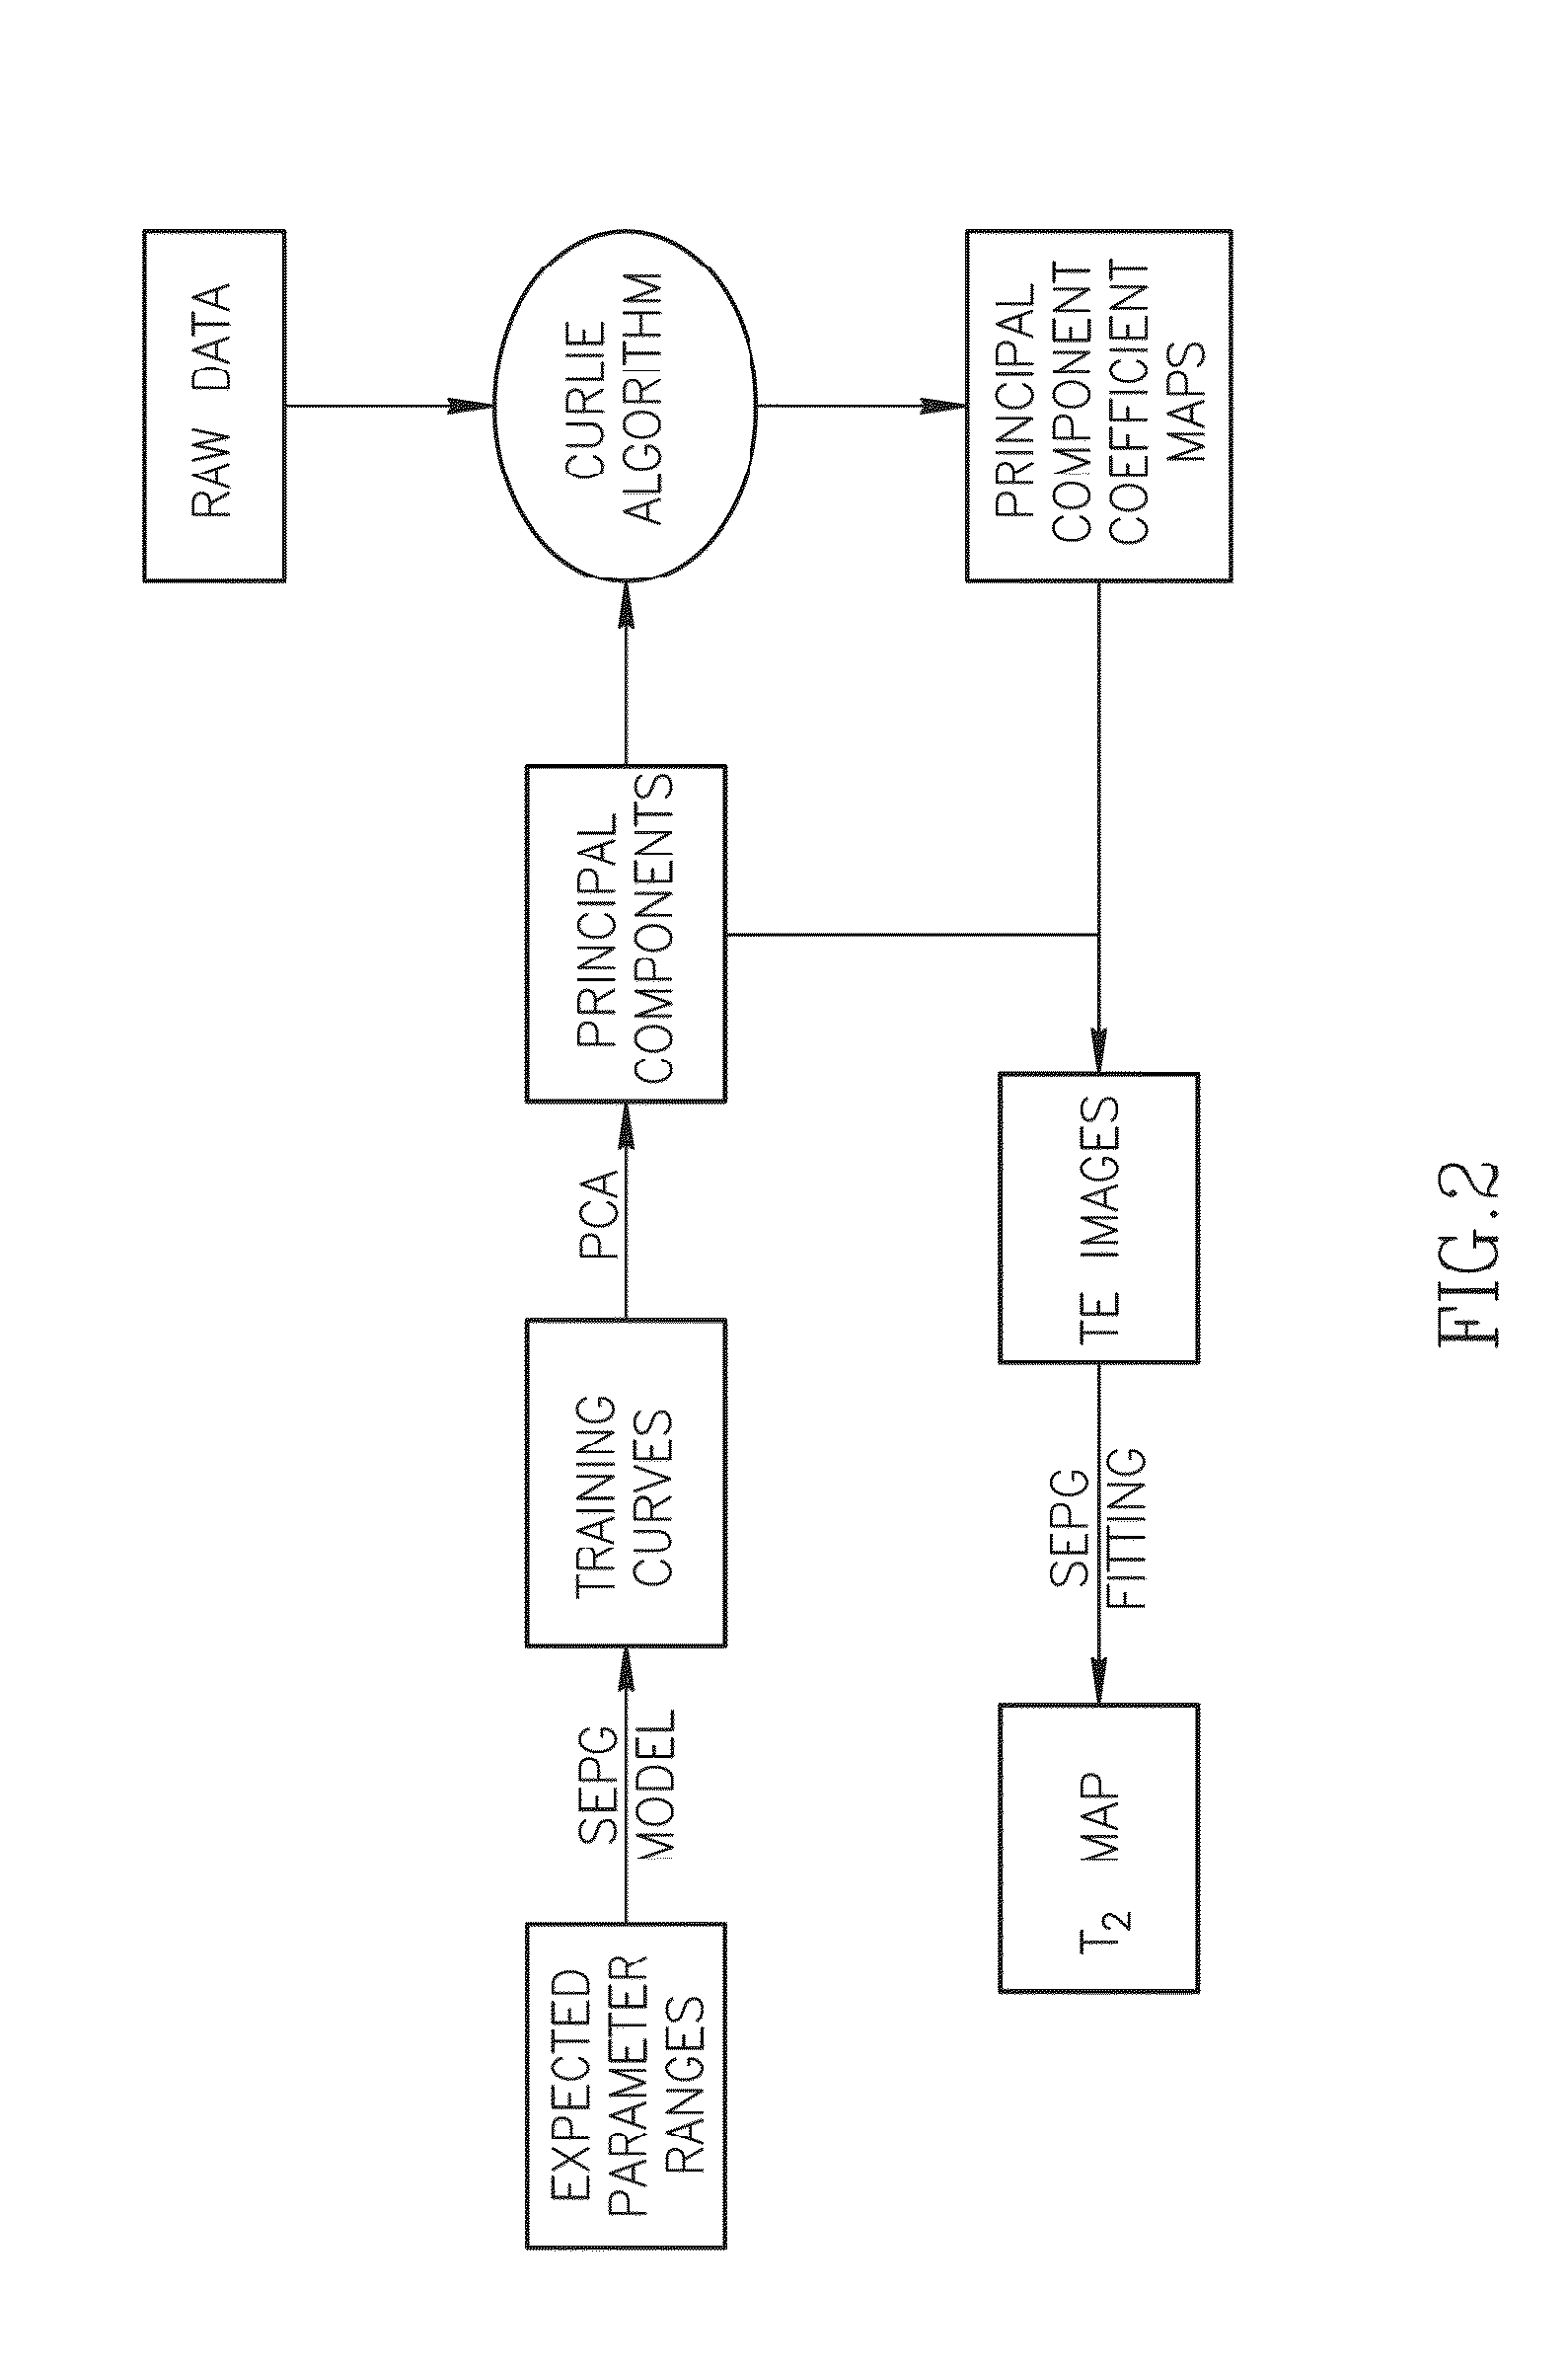 System and method for image processing with highly undersampled imaging data